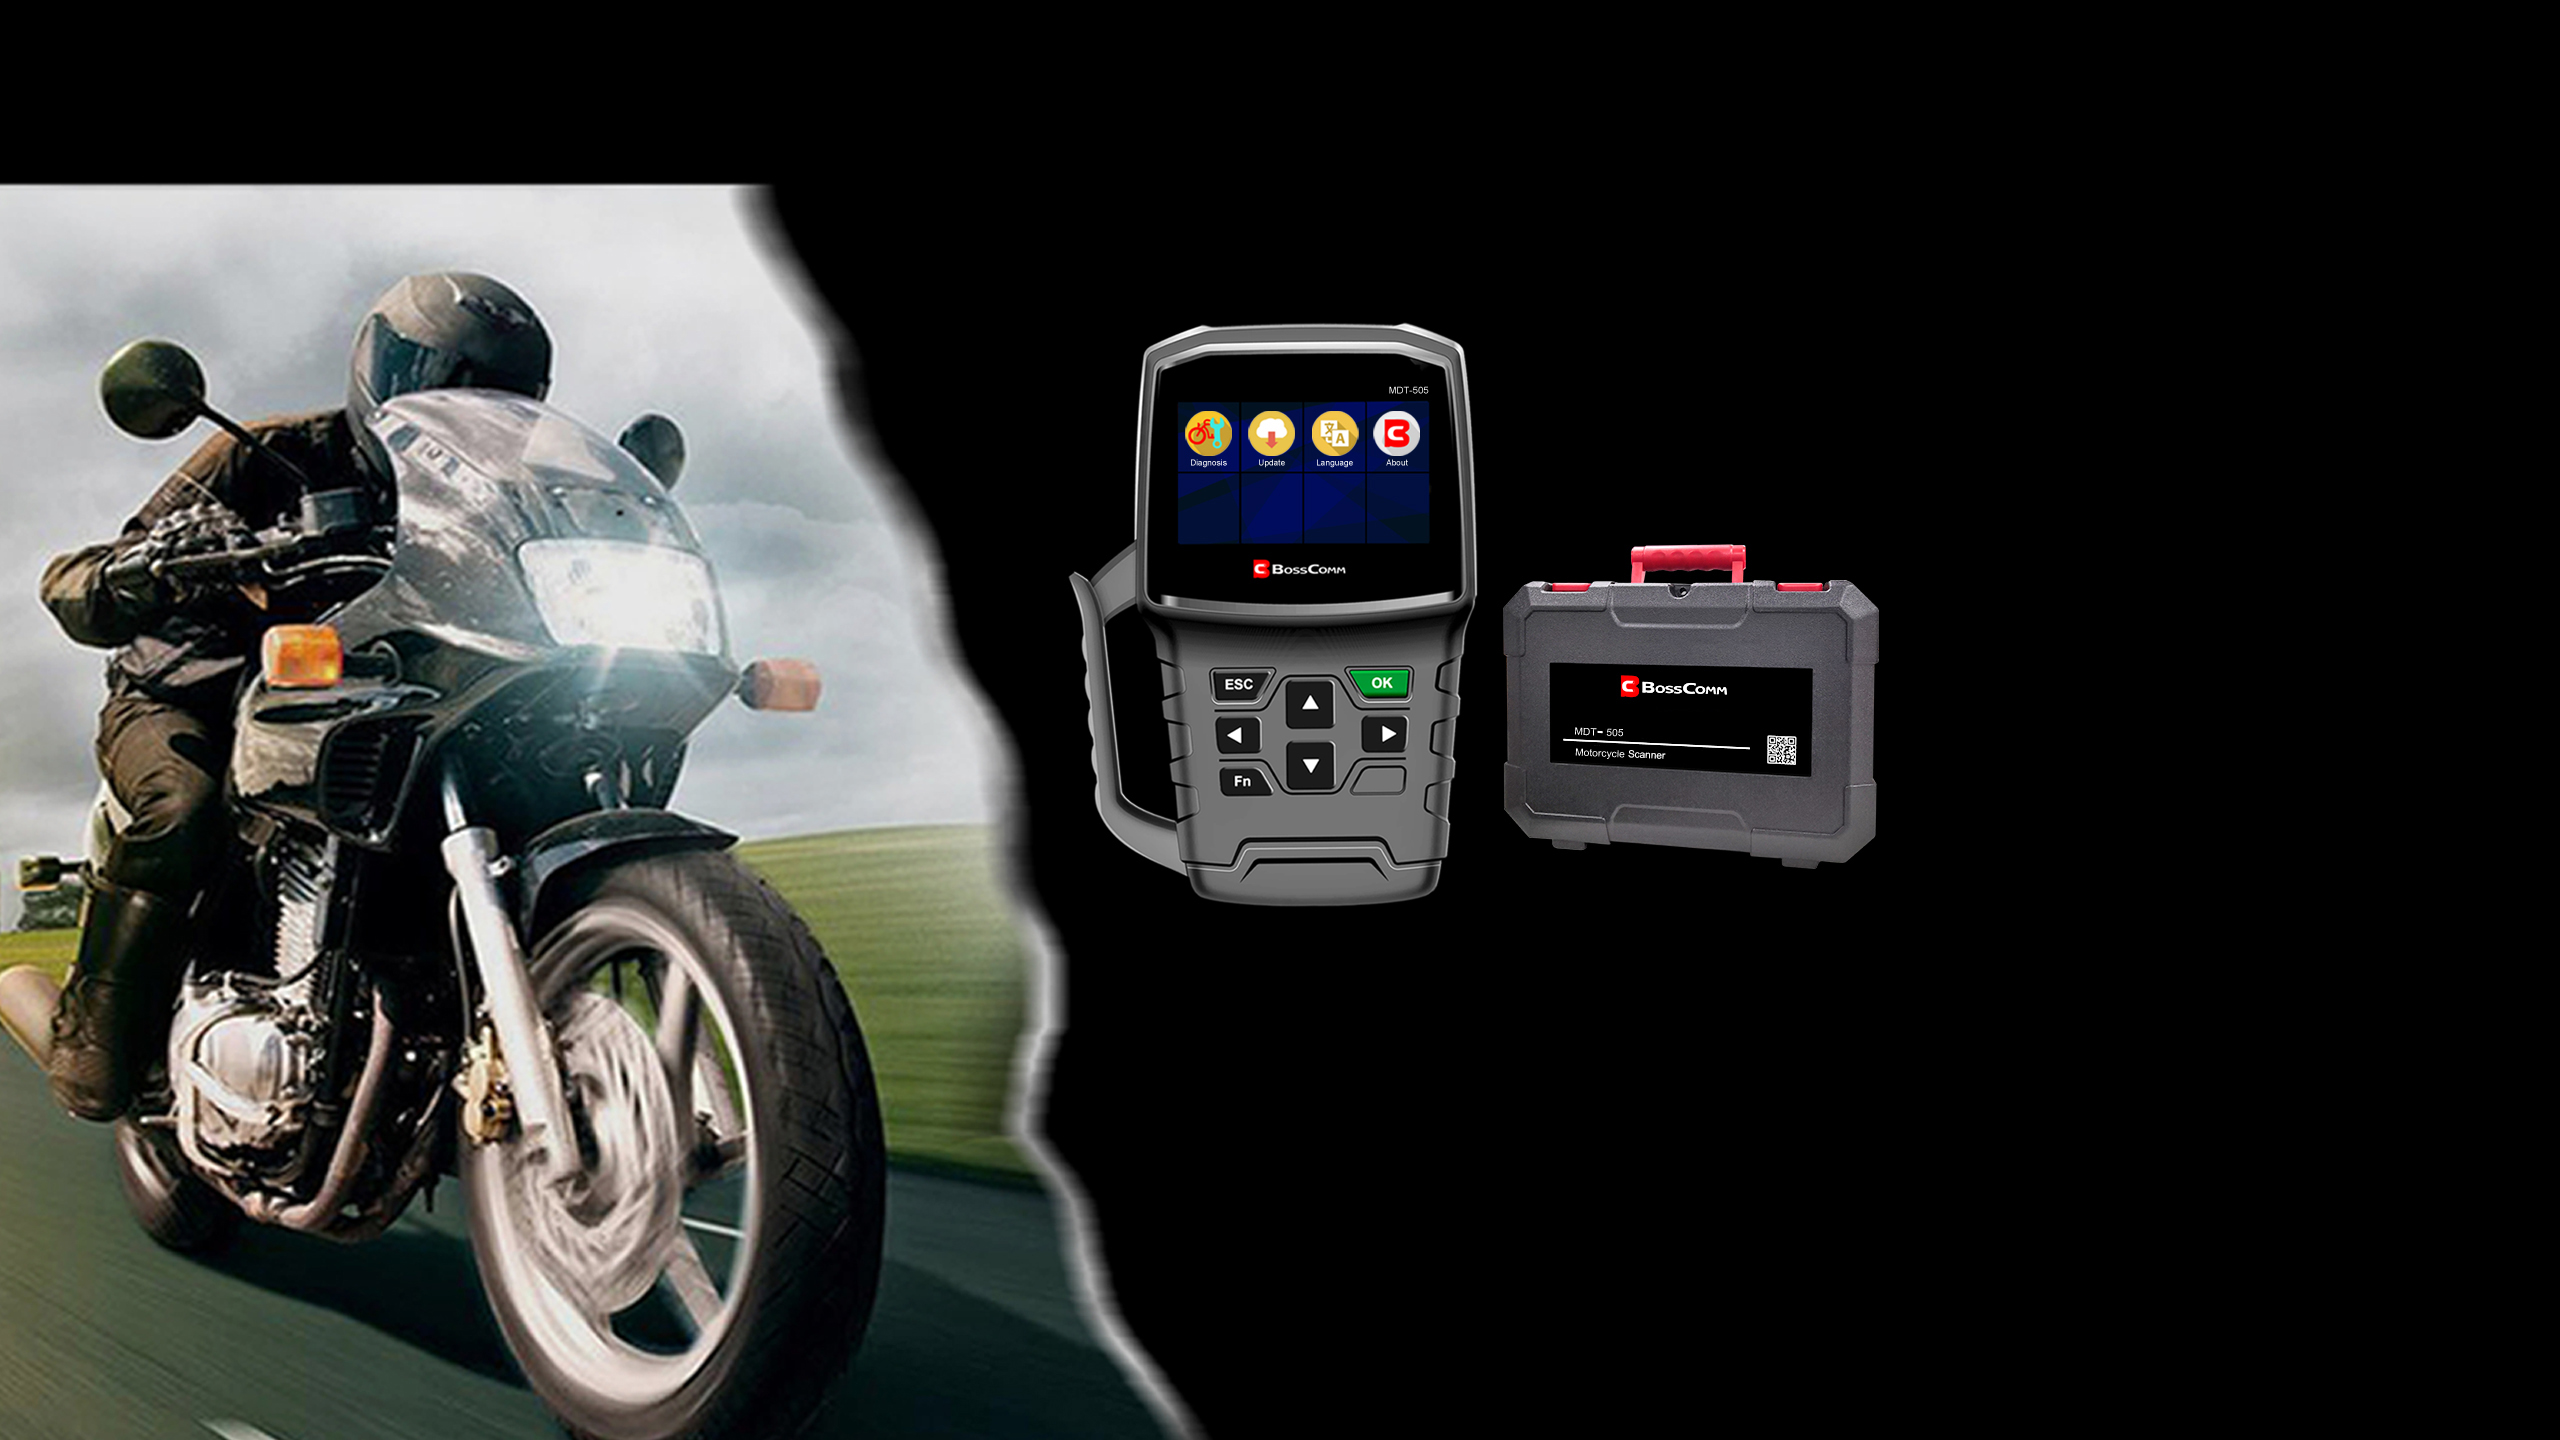 BOSSCOMM MDT-505 MOTORCYCLE DIAGNOSTIC TOOL